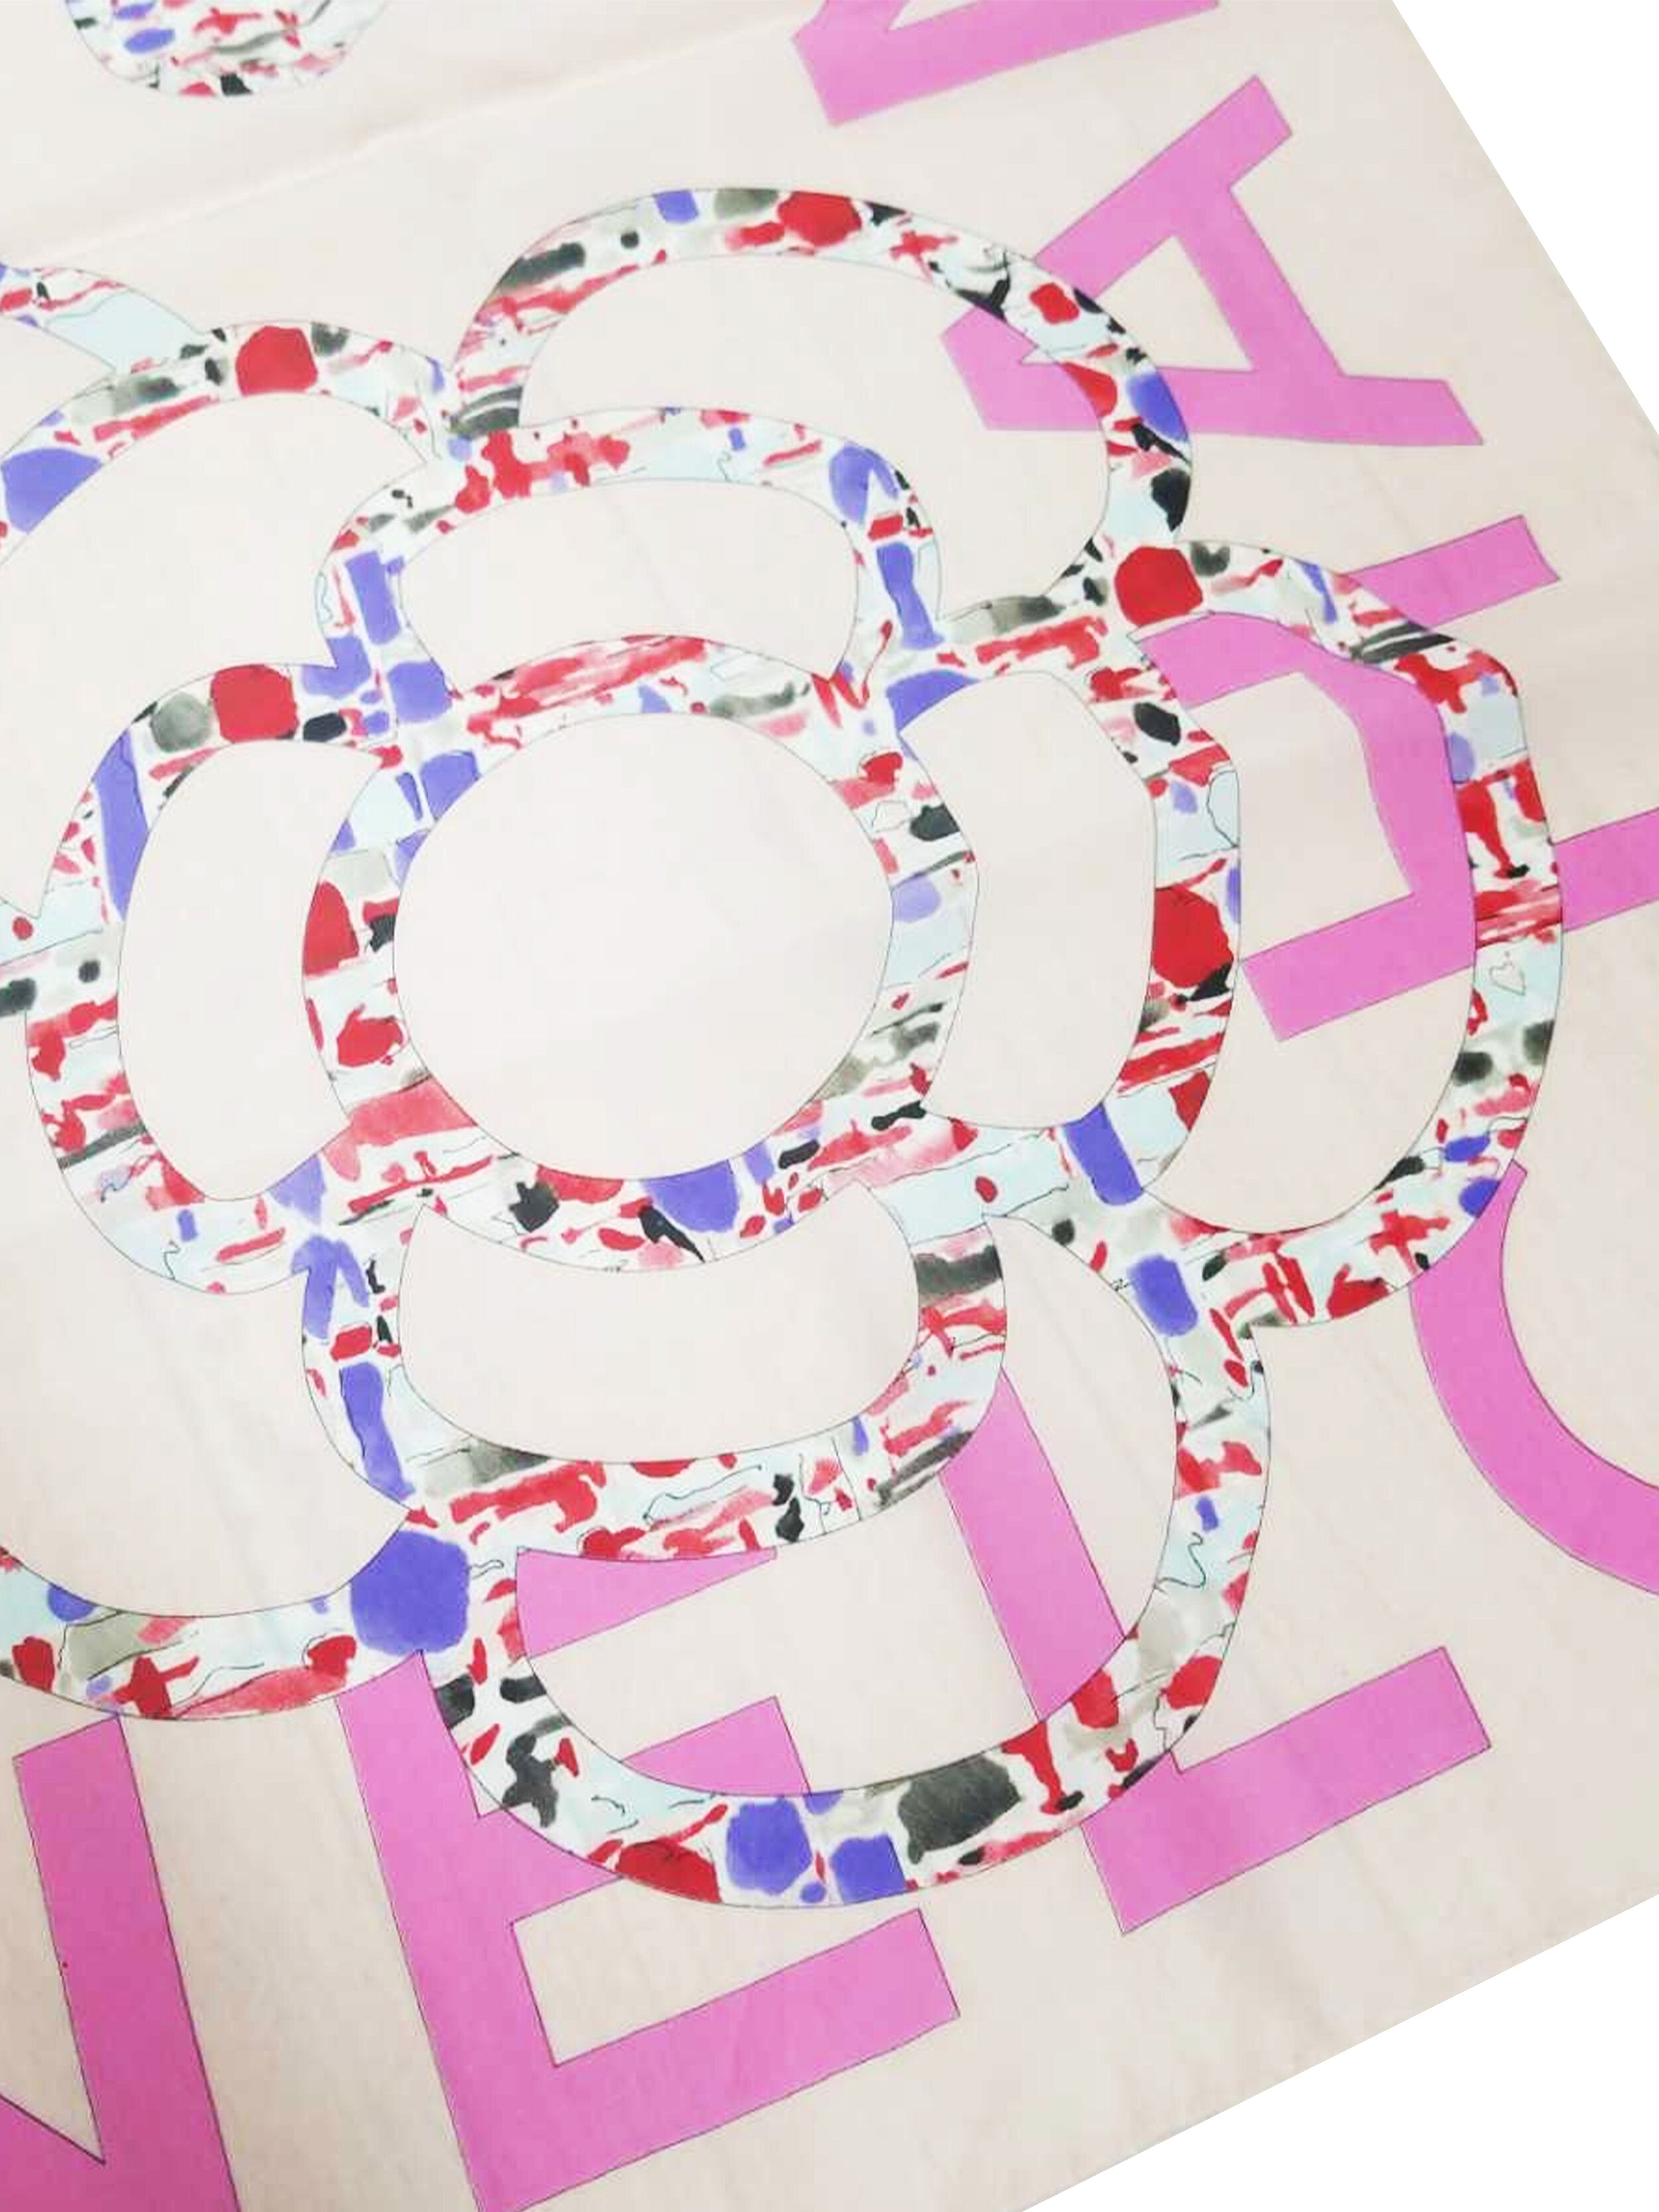 Chanel multicolor camellias and jewels pattern silk scarf